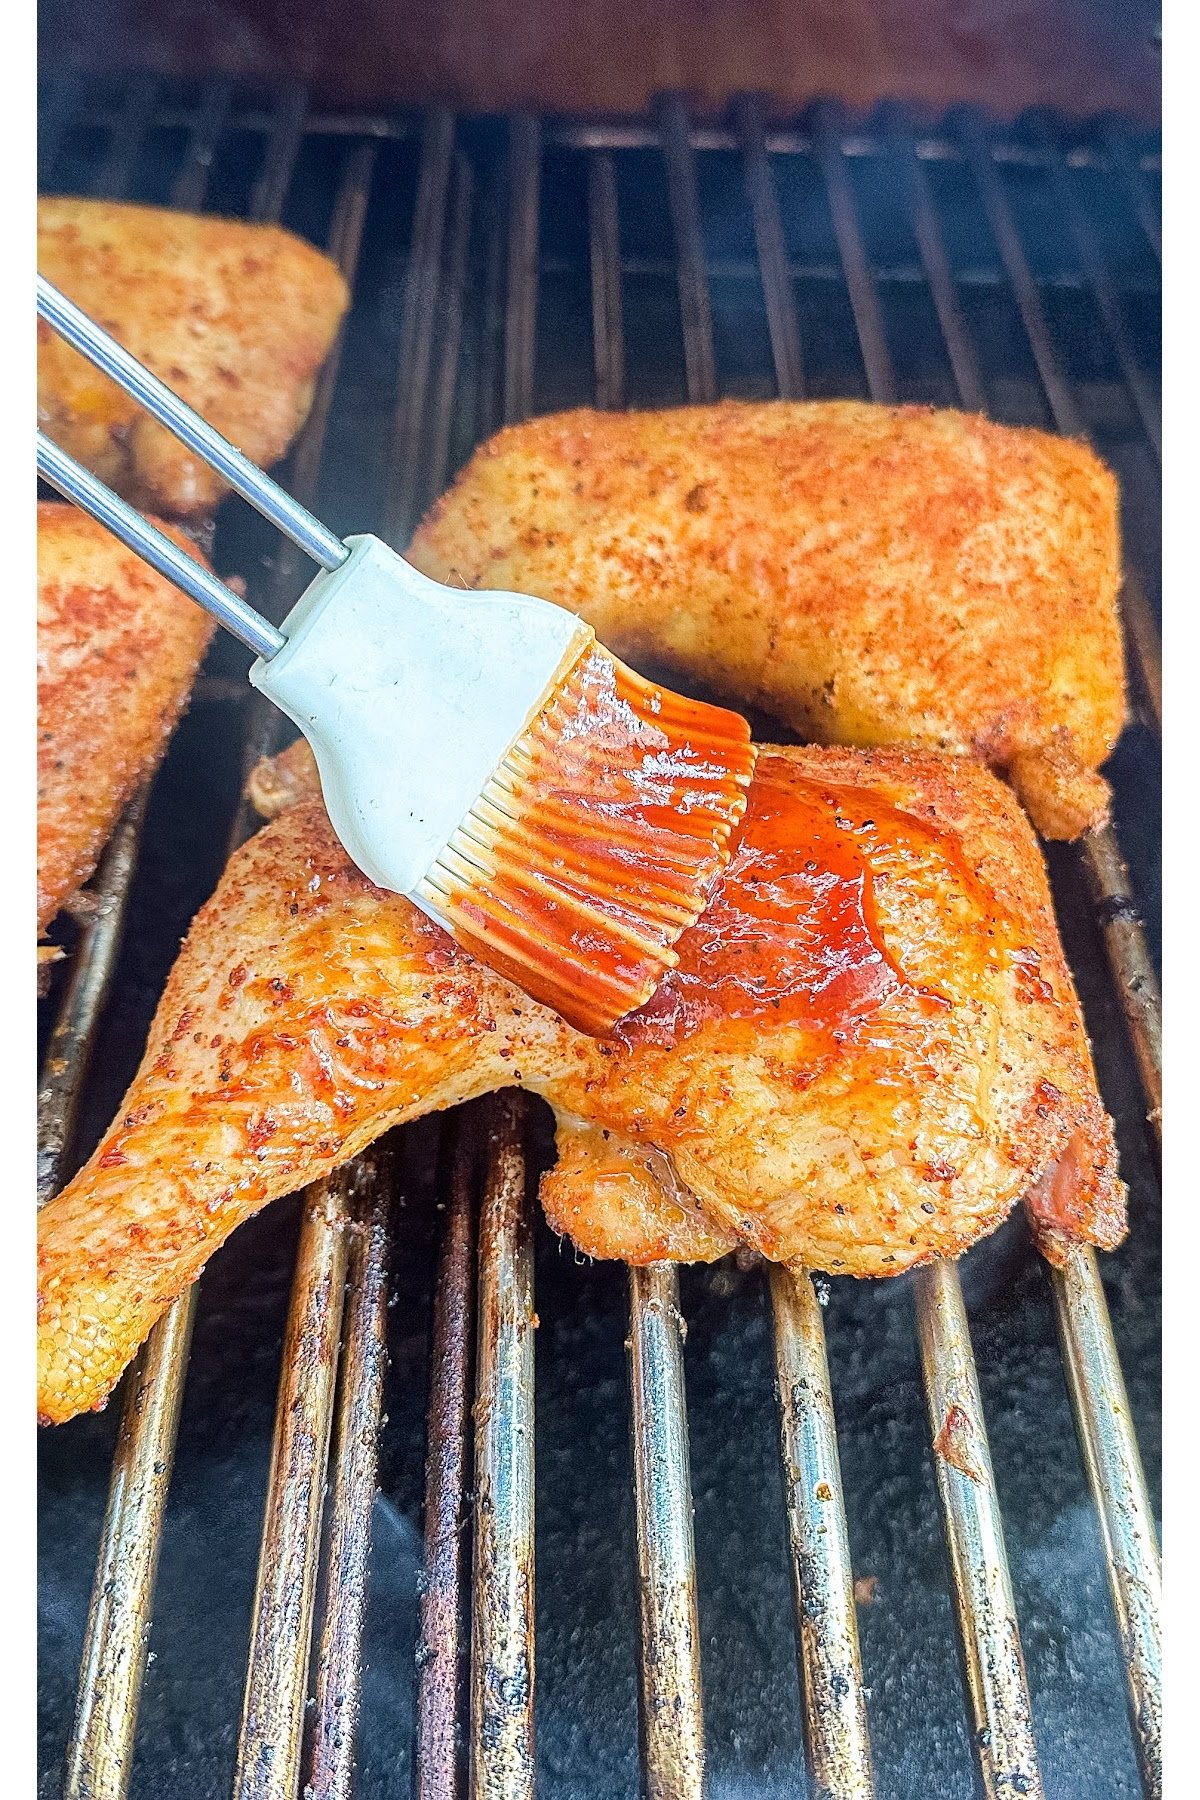 Chicken leg quarters being brushed with BBQ sauce on the grill.